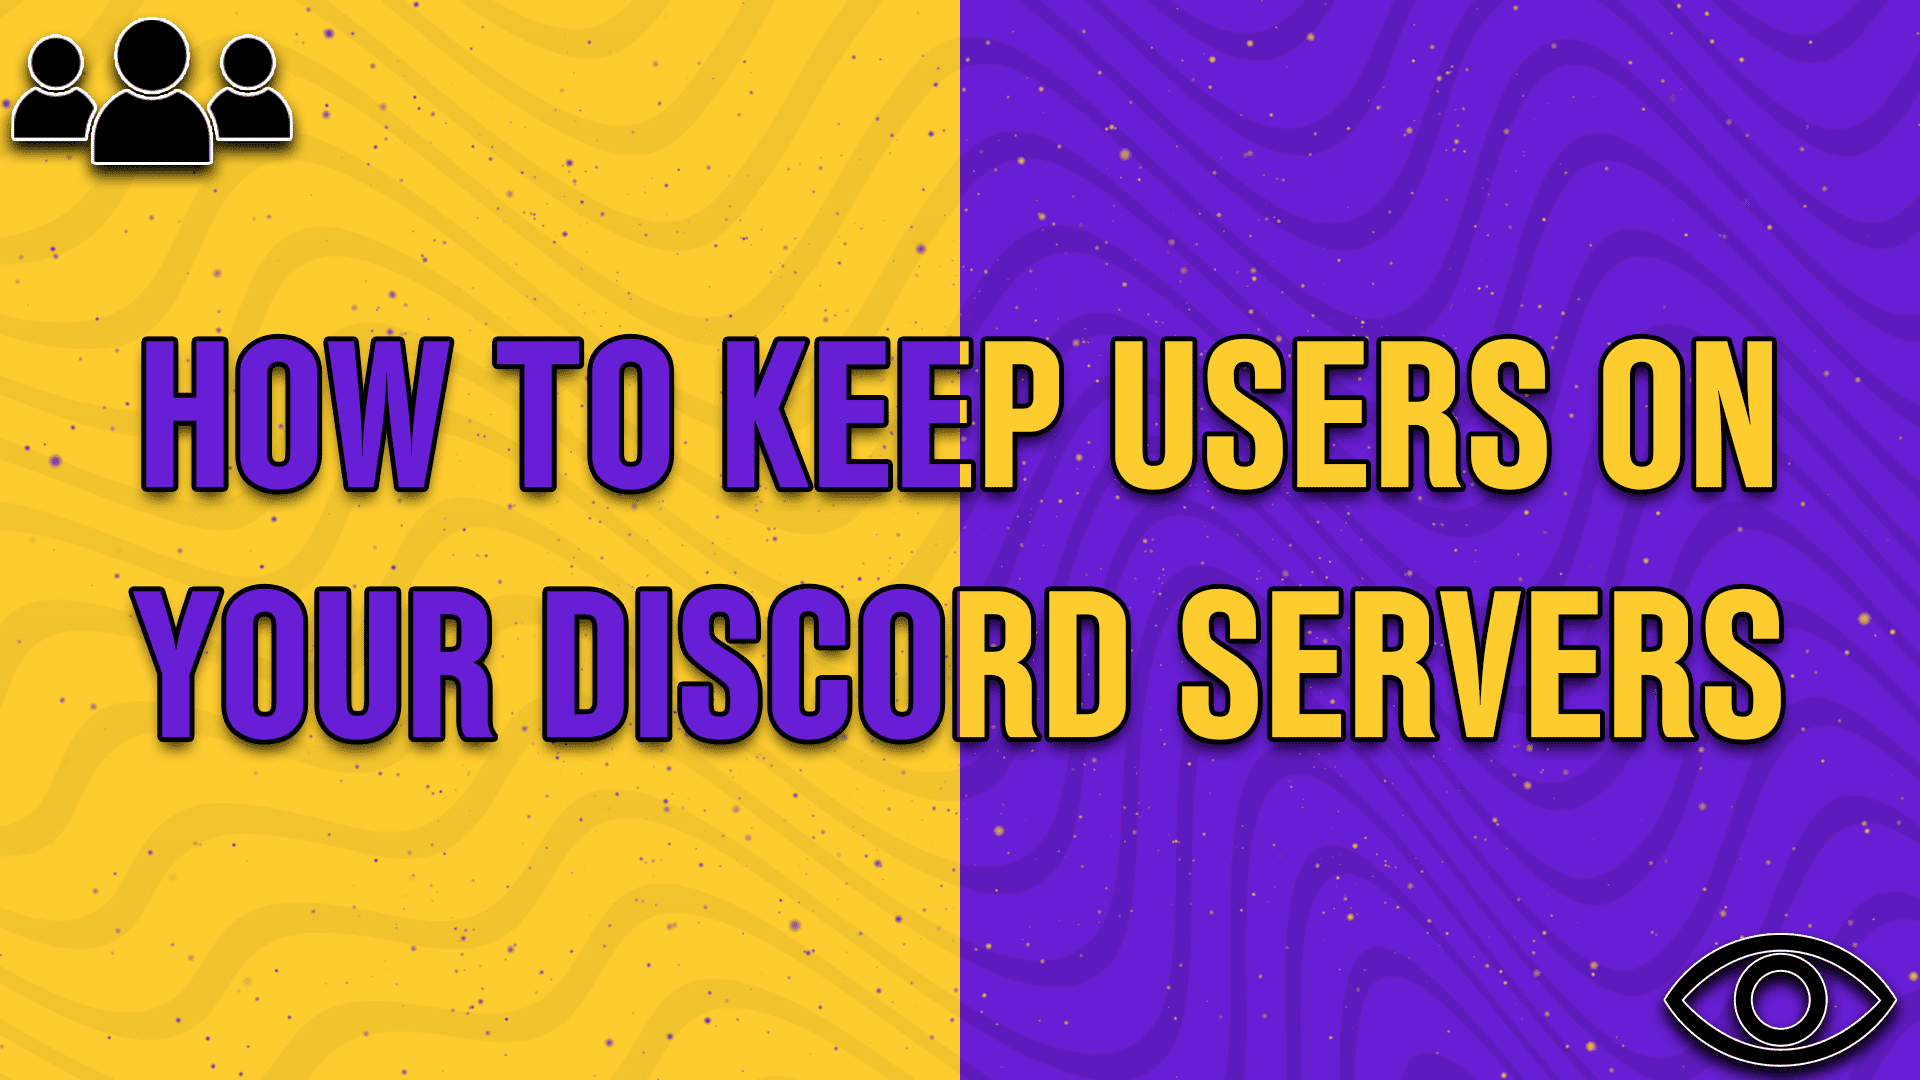 How to keep users on your discord servers - StreamBee